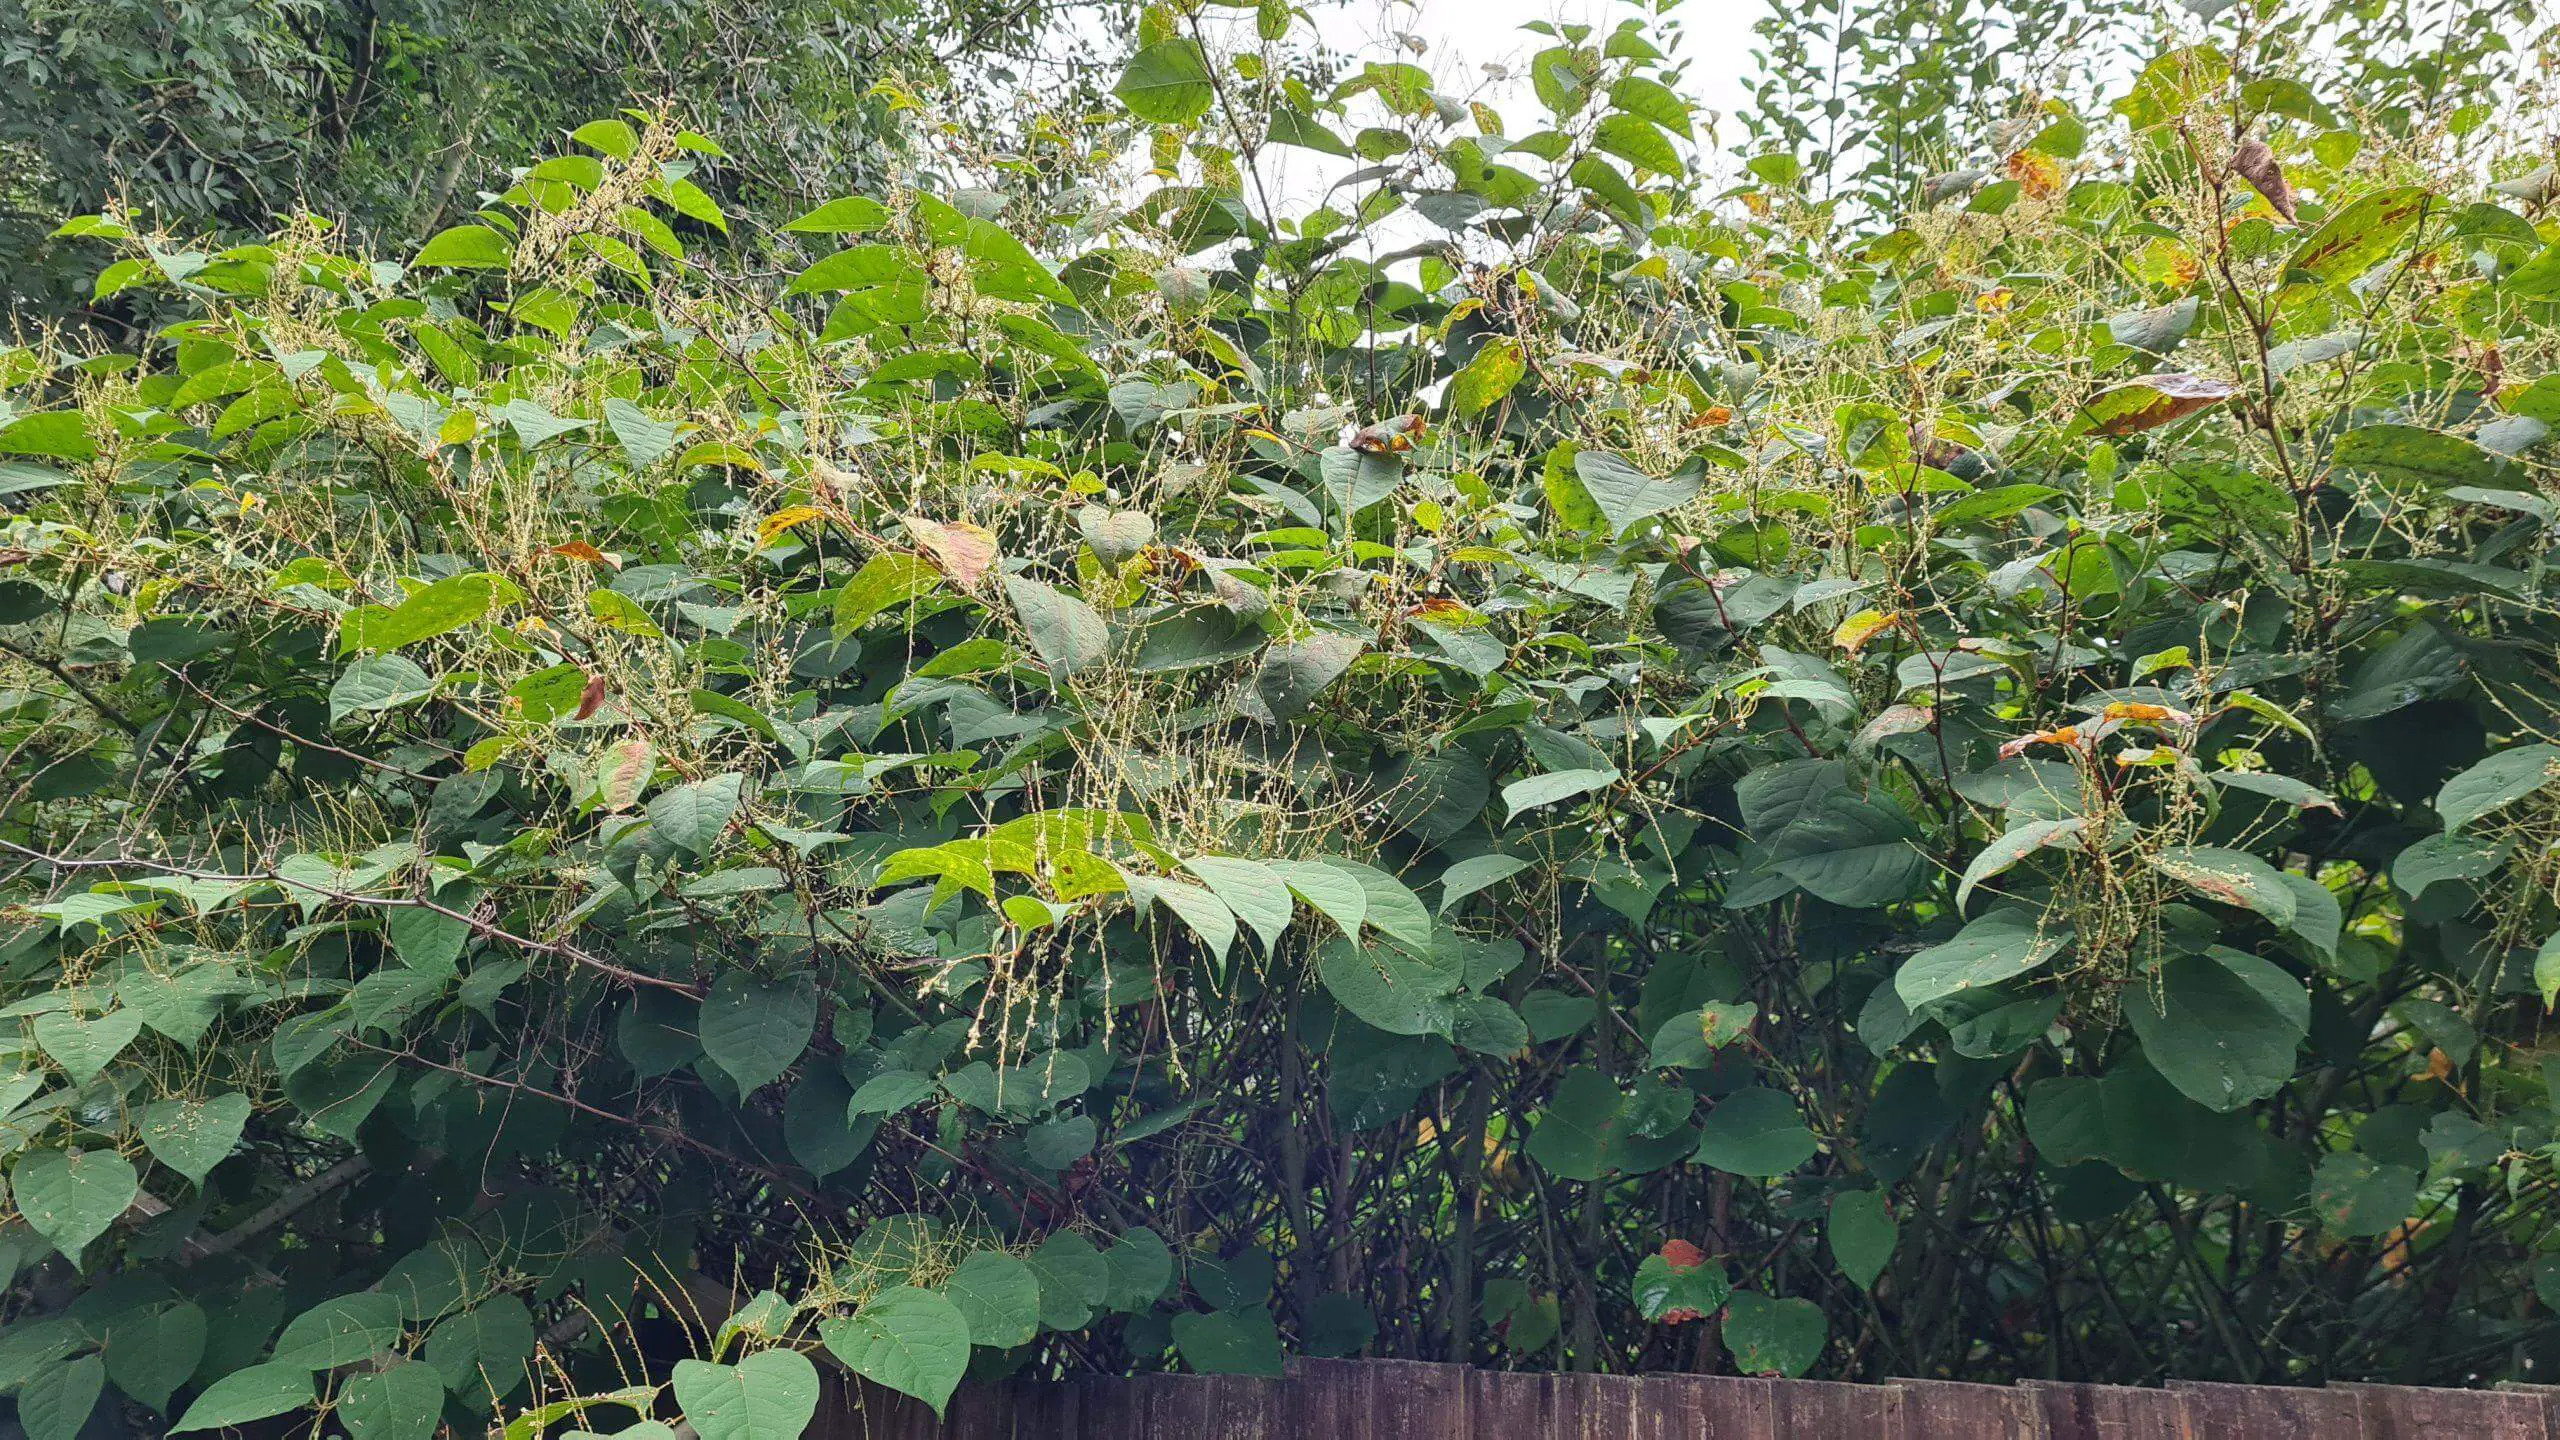 Japanese knotweed remove methods and their associated costs scaled